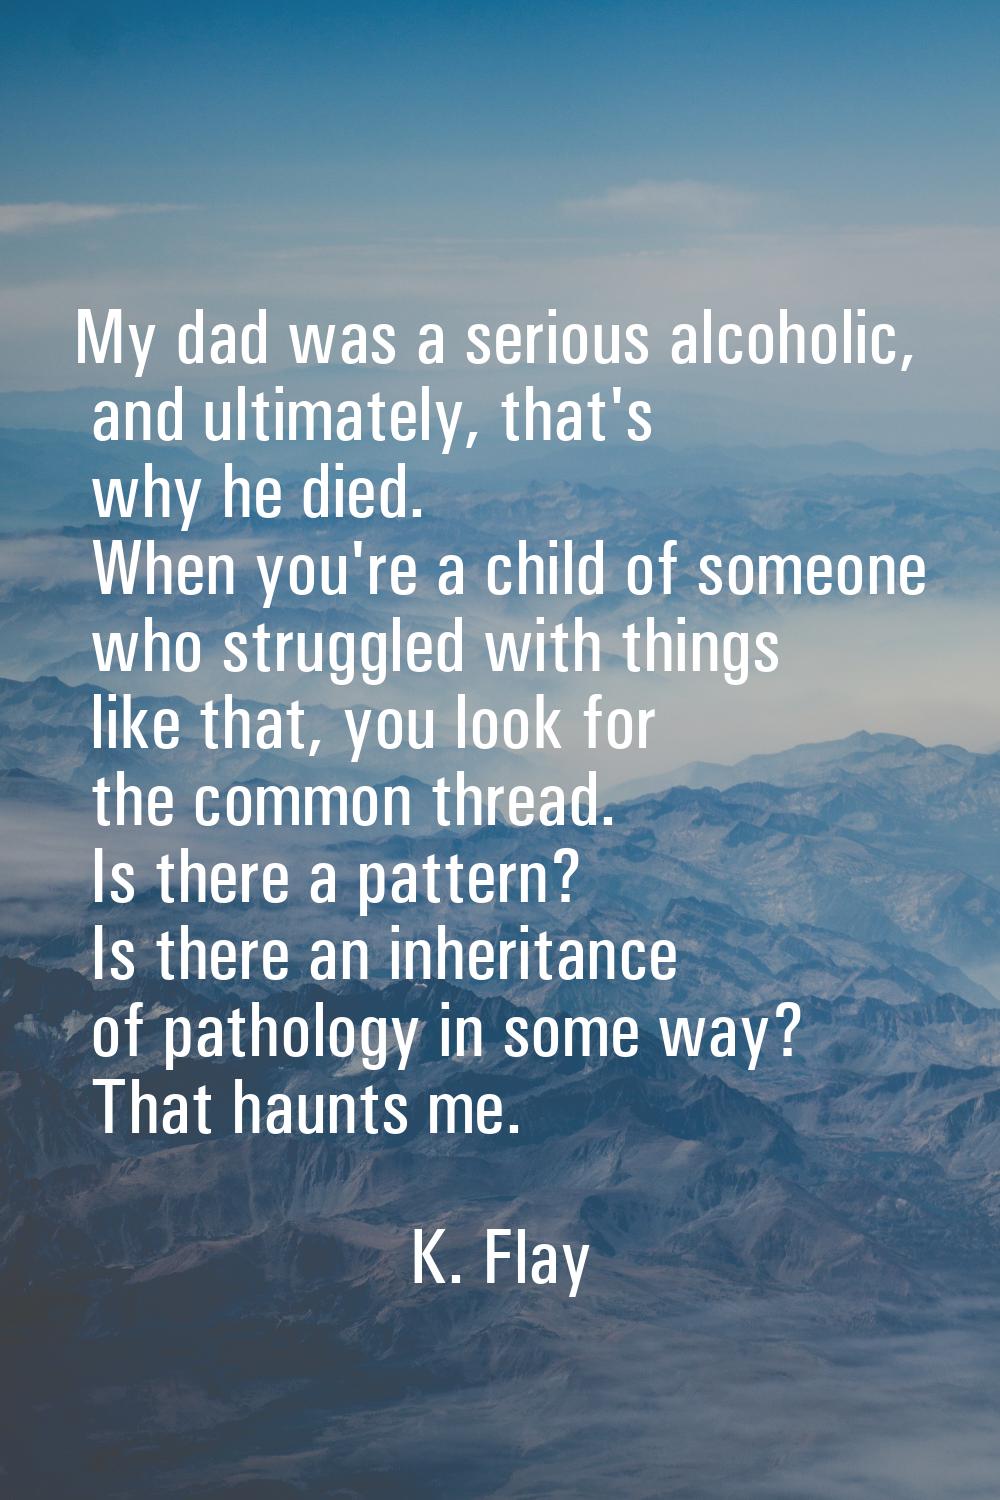 My dad was a serious alcoholic, and ultimately, that's why he died. When you're a child of someone 